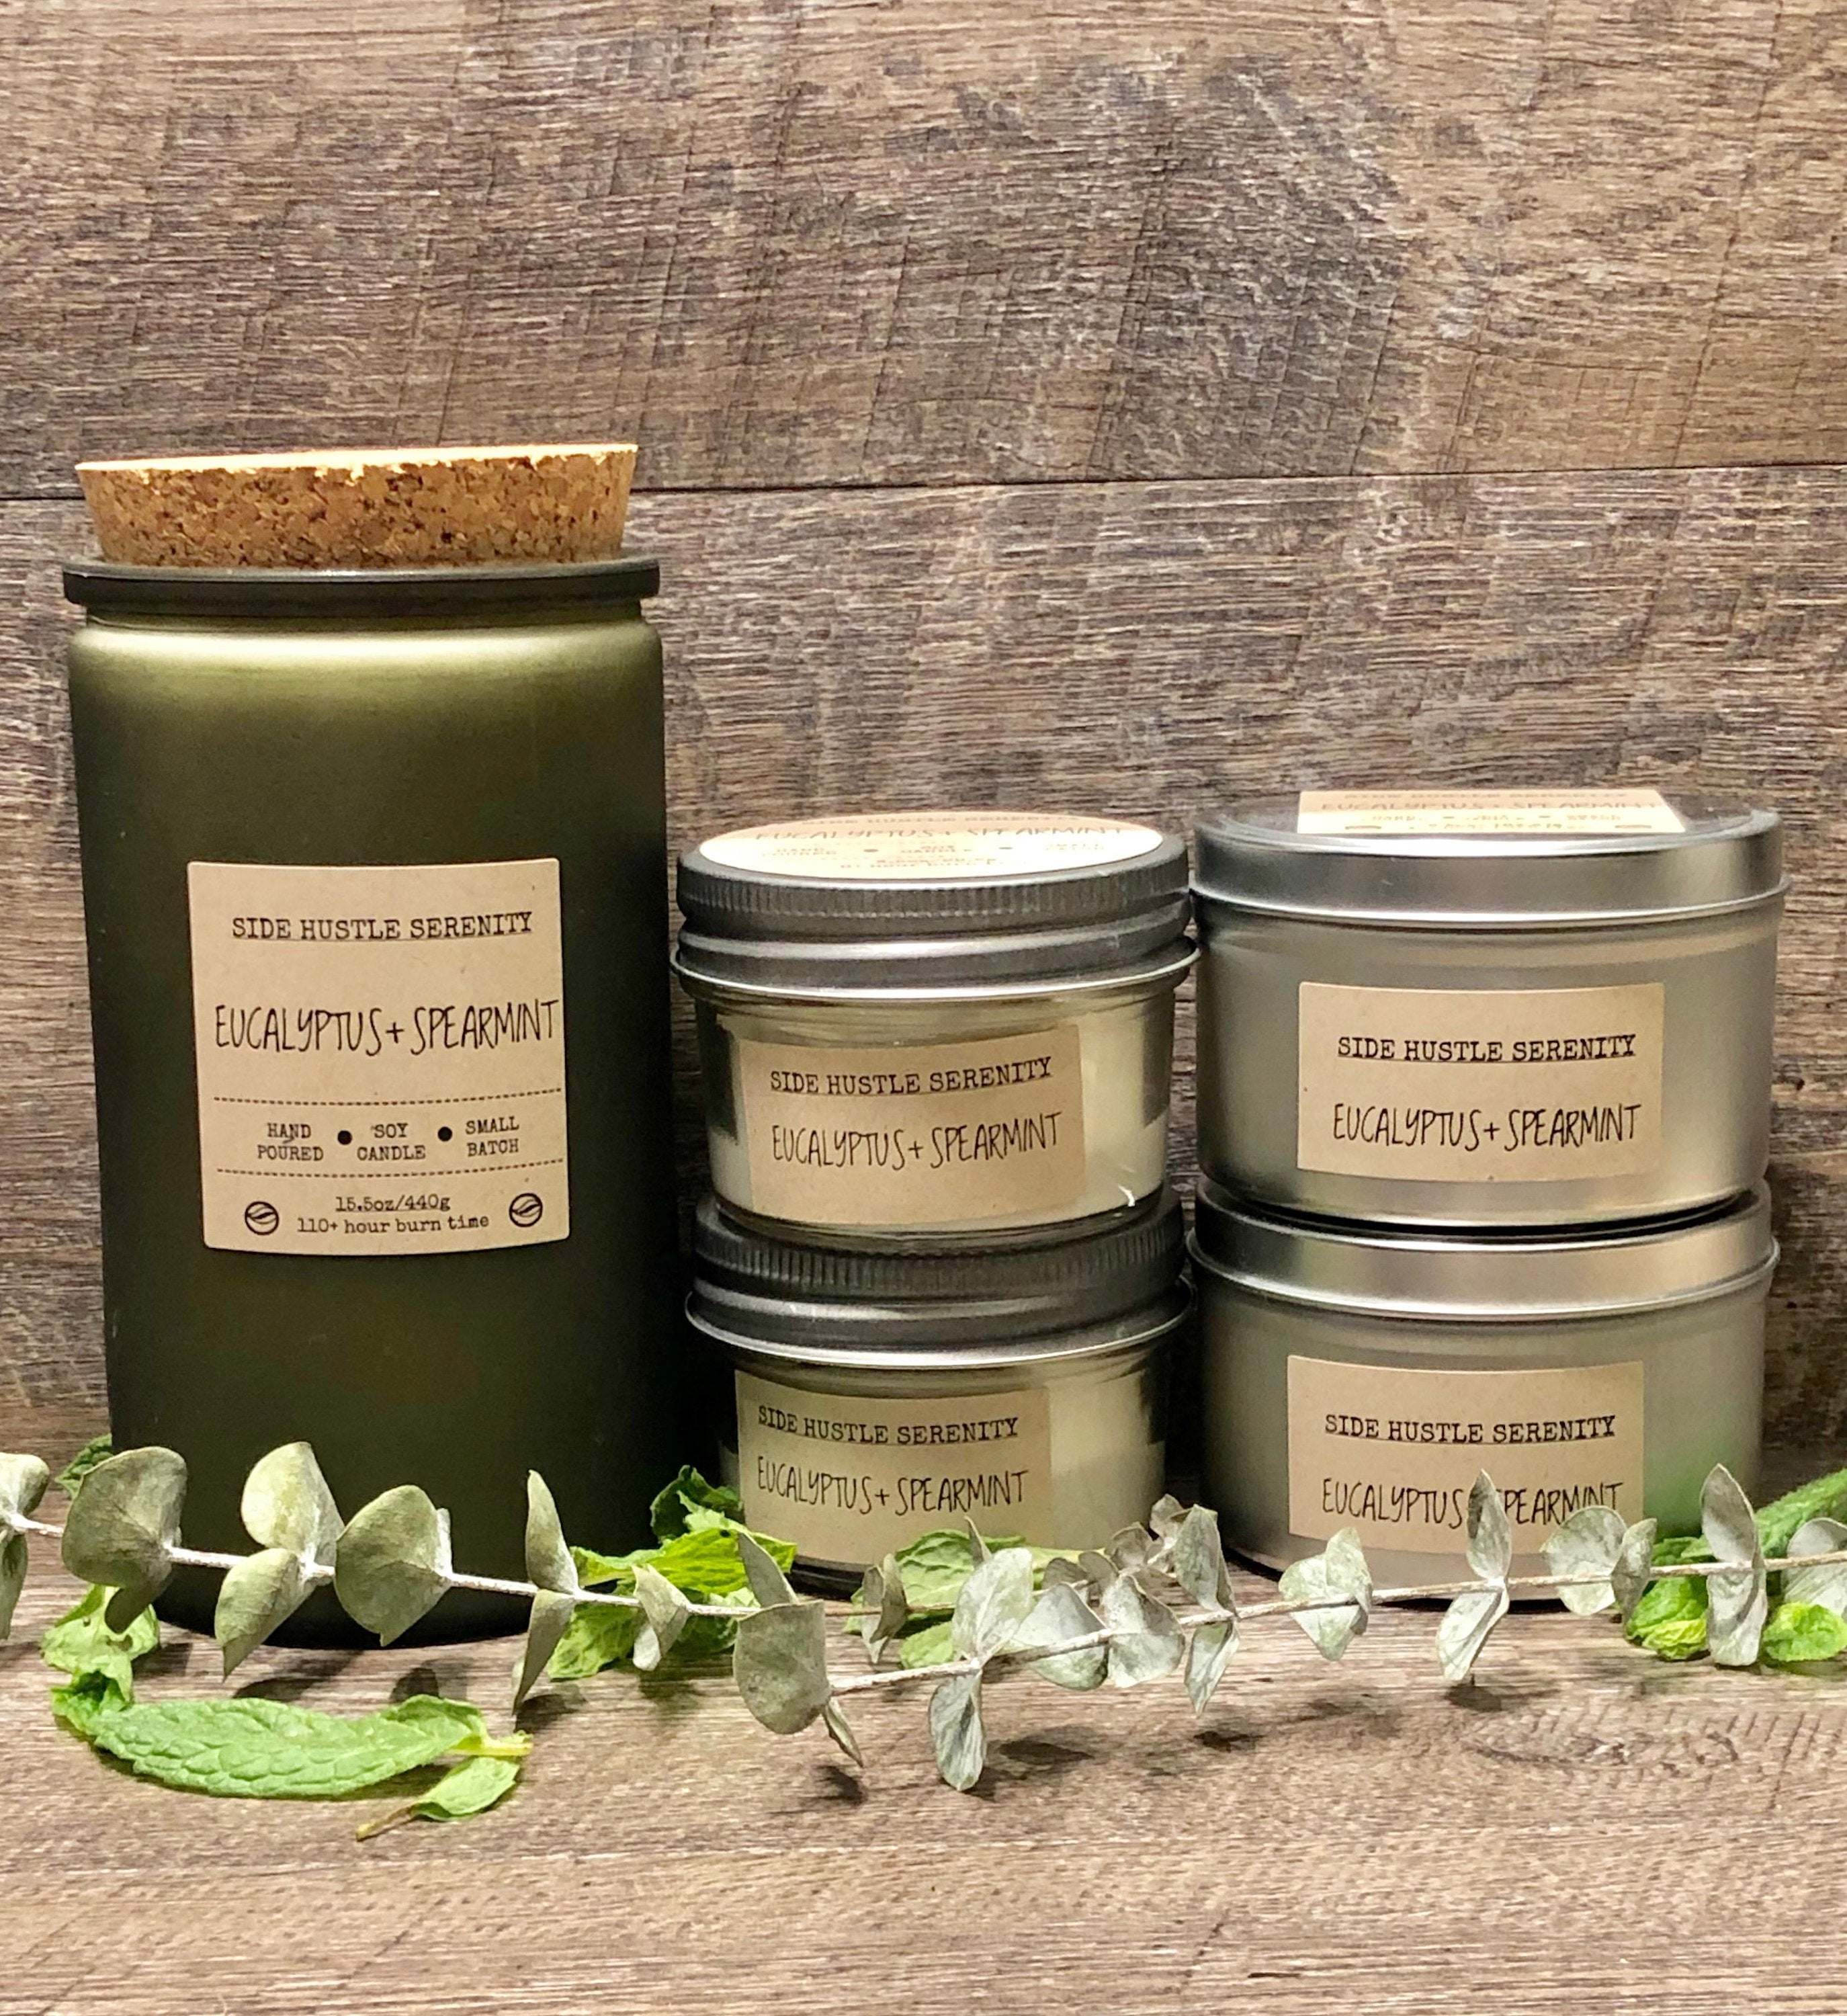 Eucalyptus + Spearmint Scented Soy Candle - Side Hustle Serenity